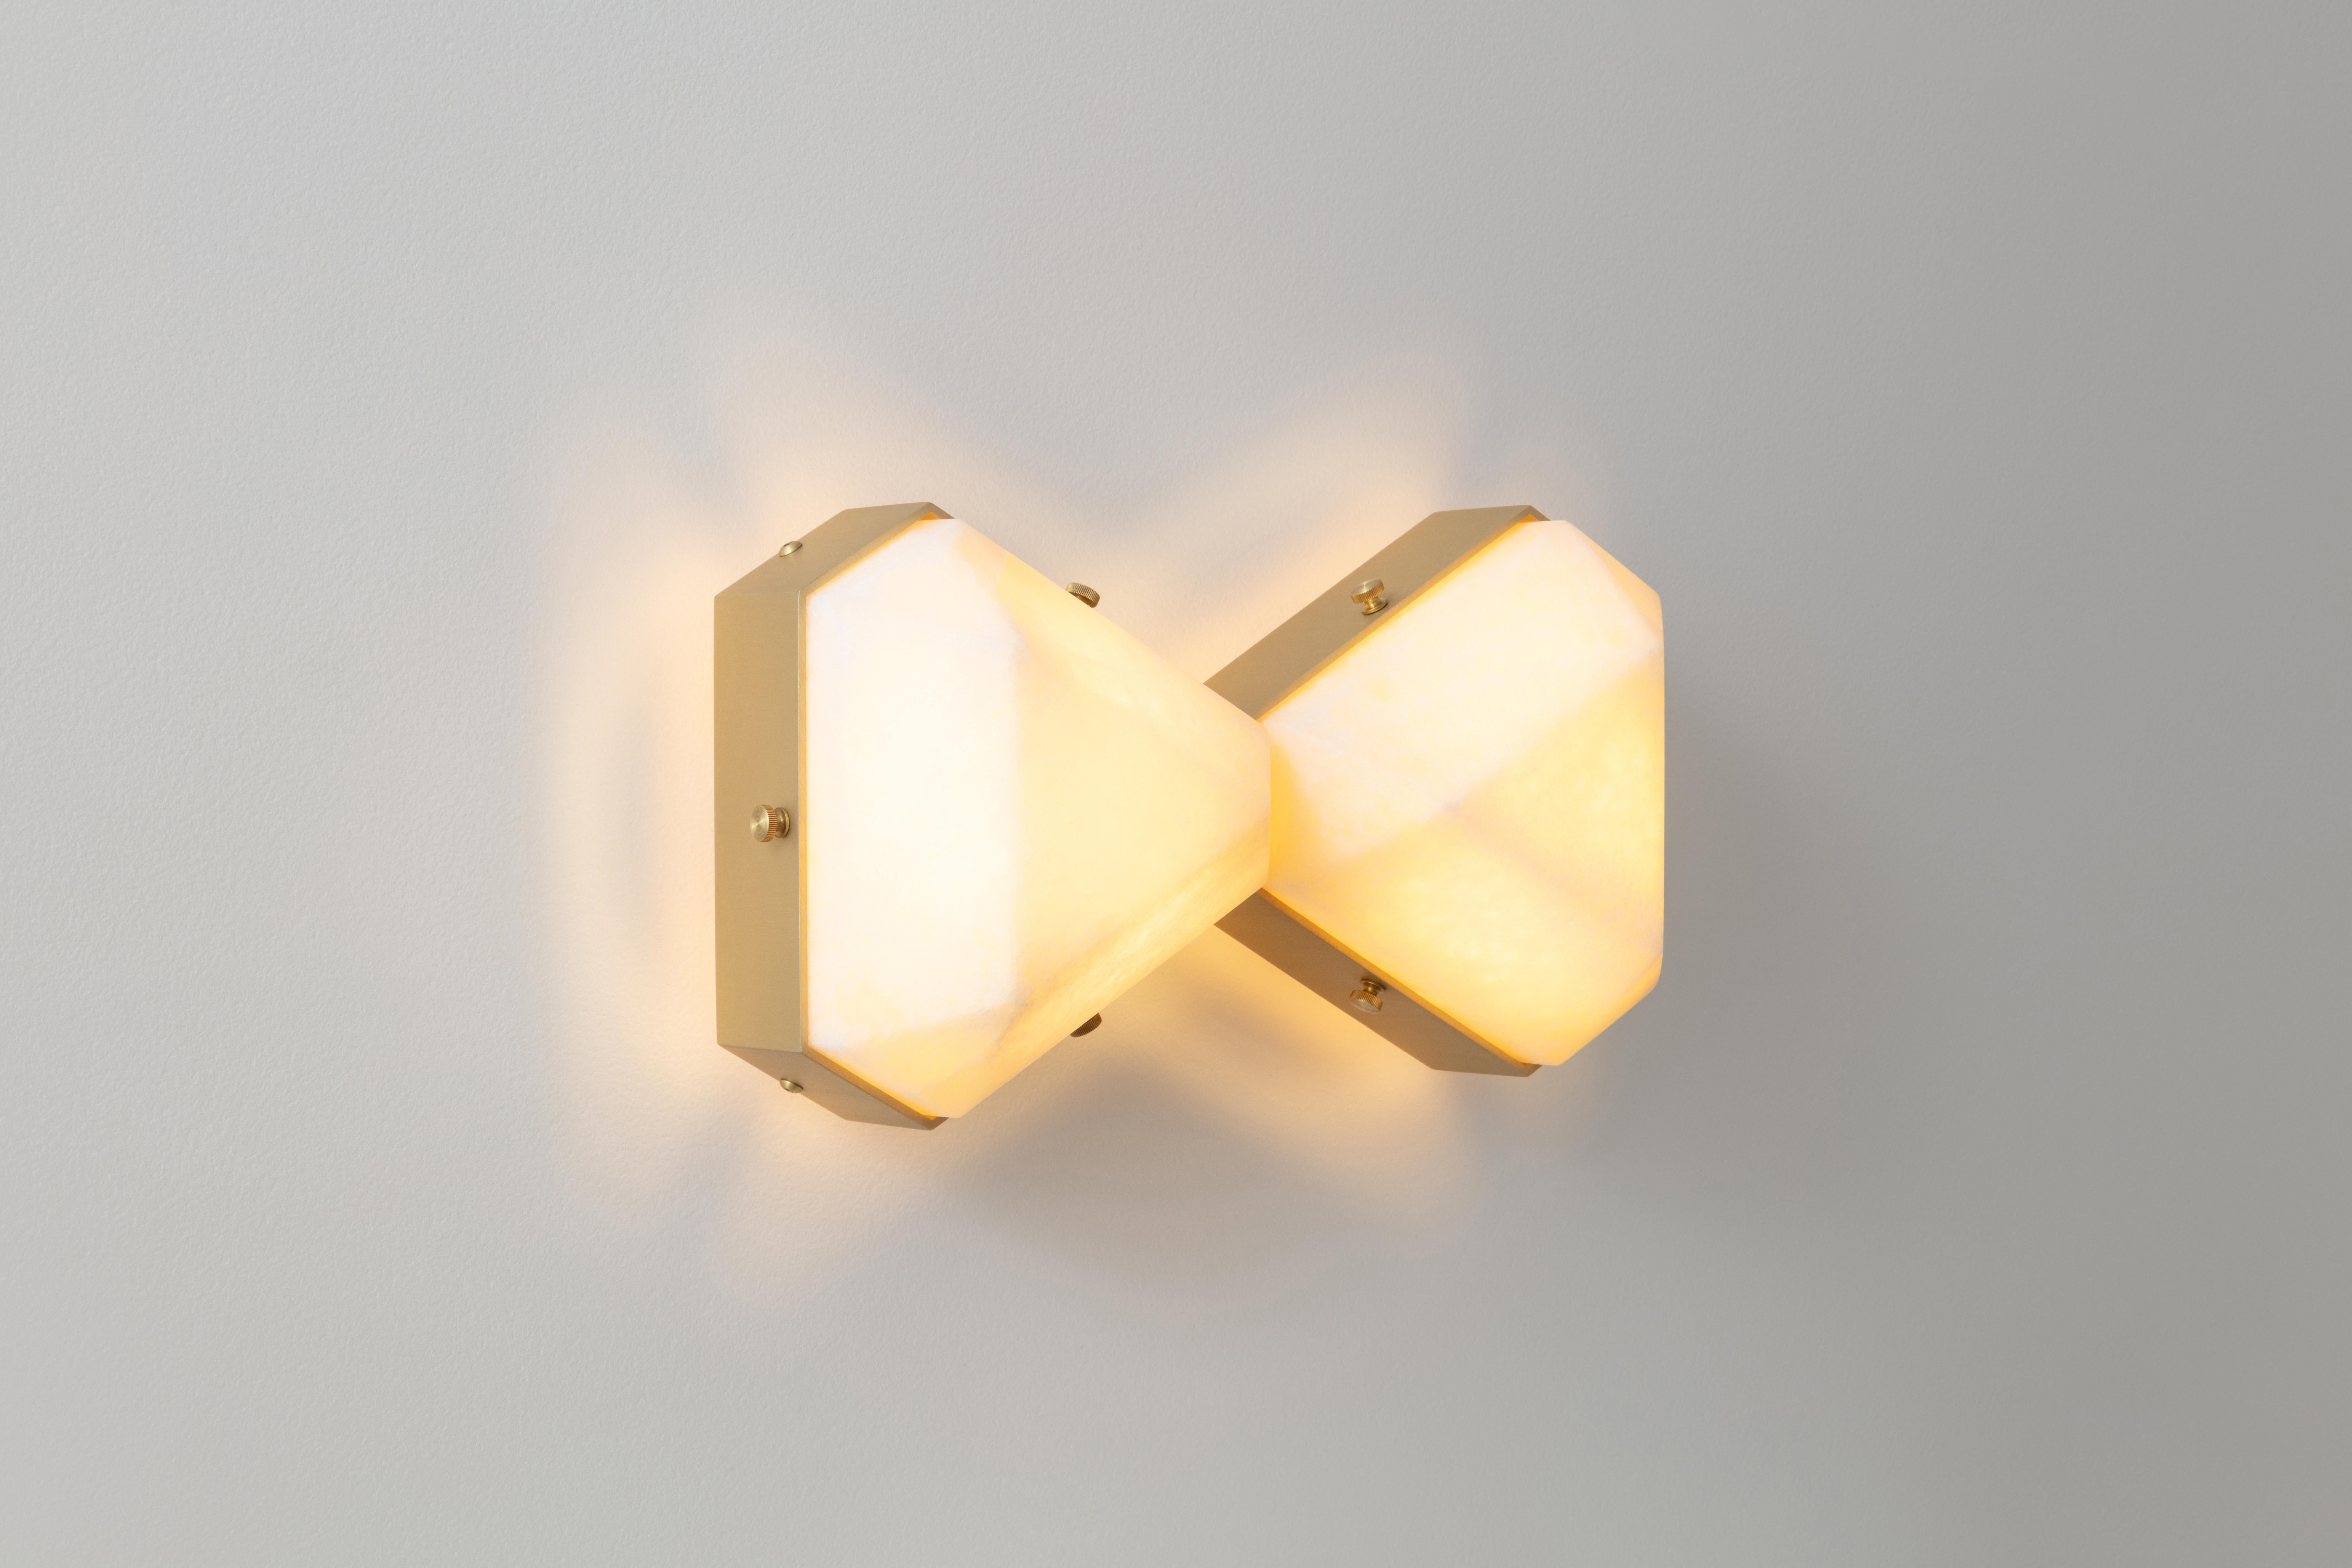 Vega Due Wall Sconce / Ceiling Mount in Onyx by Matthew Fairbank In New Condition For Sale In Brooklyn, NY